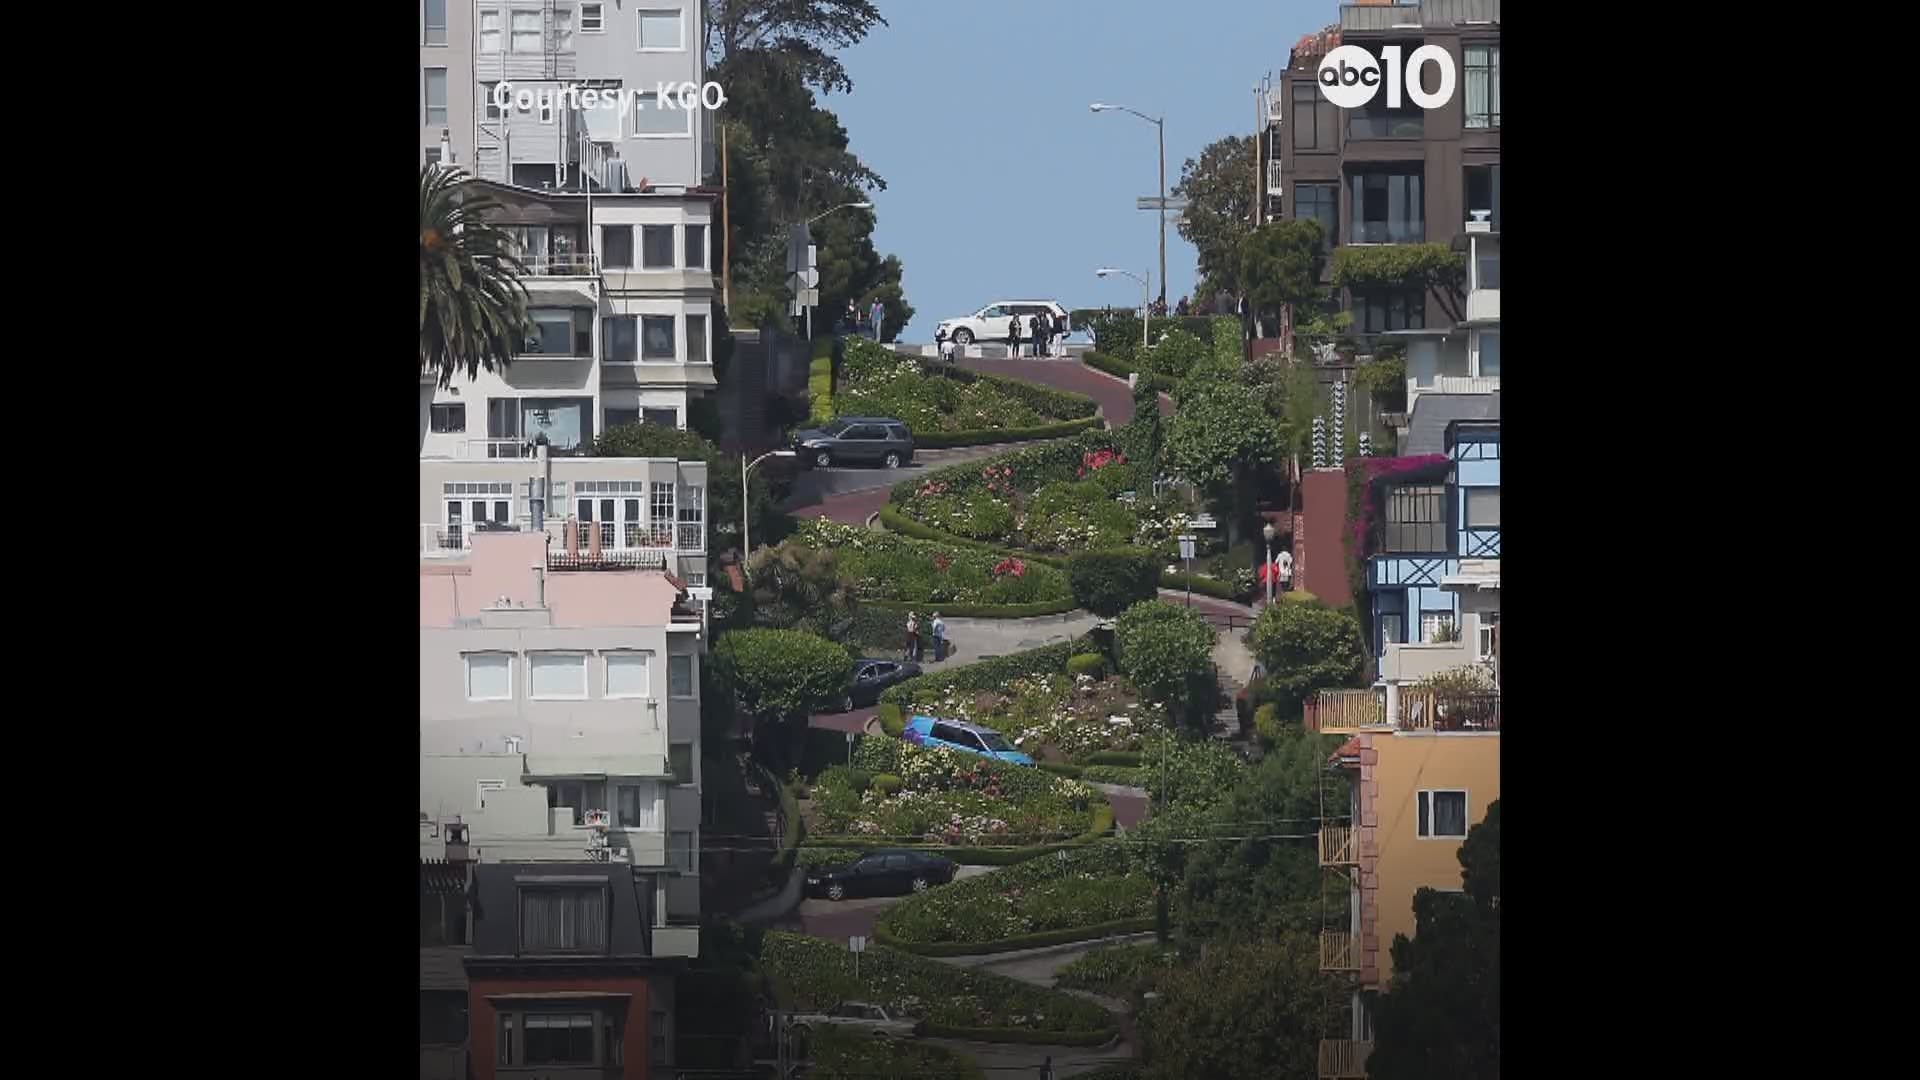 Assemblymember Phil Ting introduced a bill that would give San Francisco the ability to create a reservation and toll system for people who want to drive down Lombard Street.